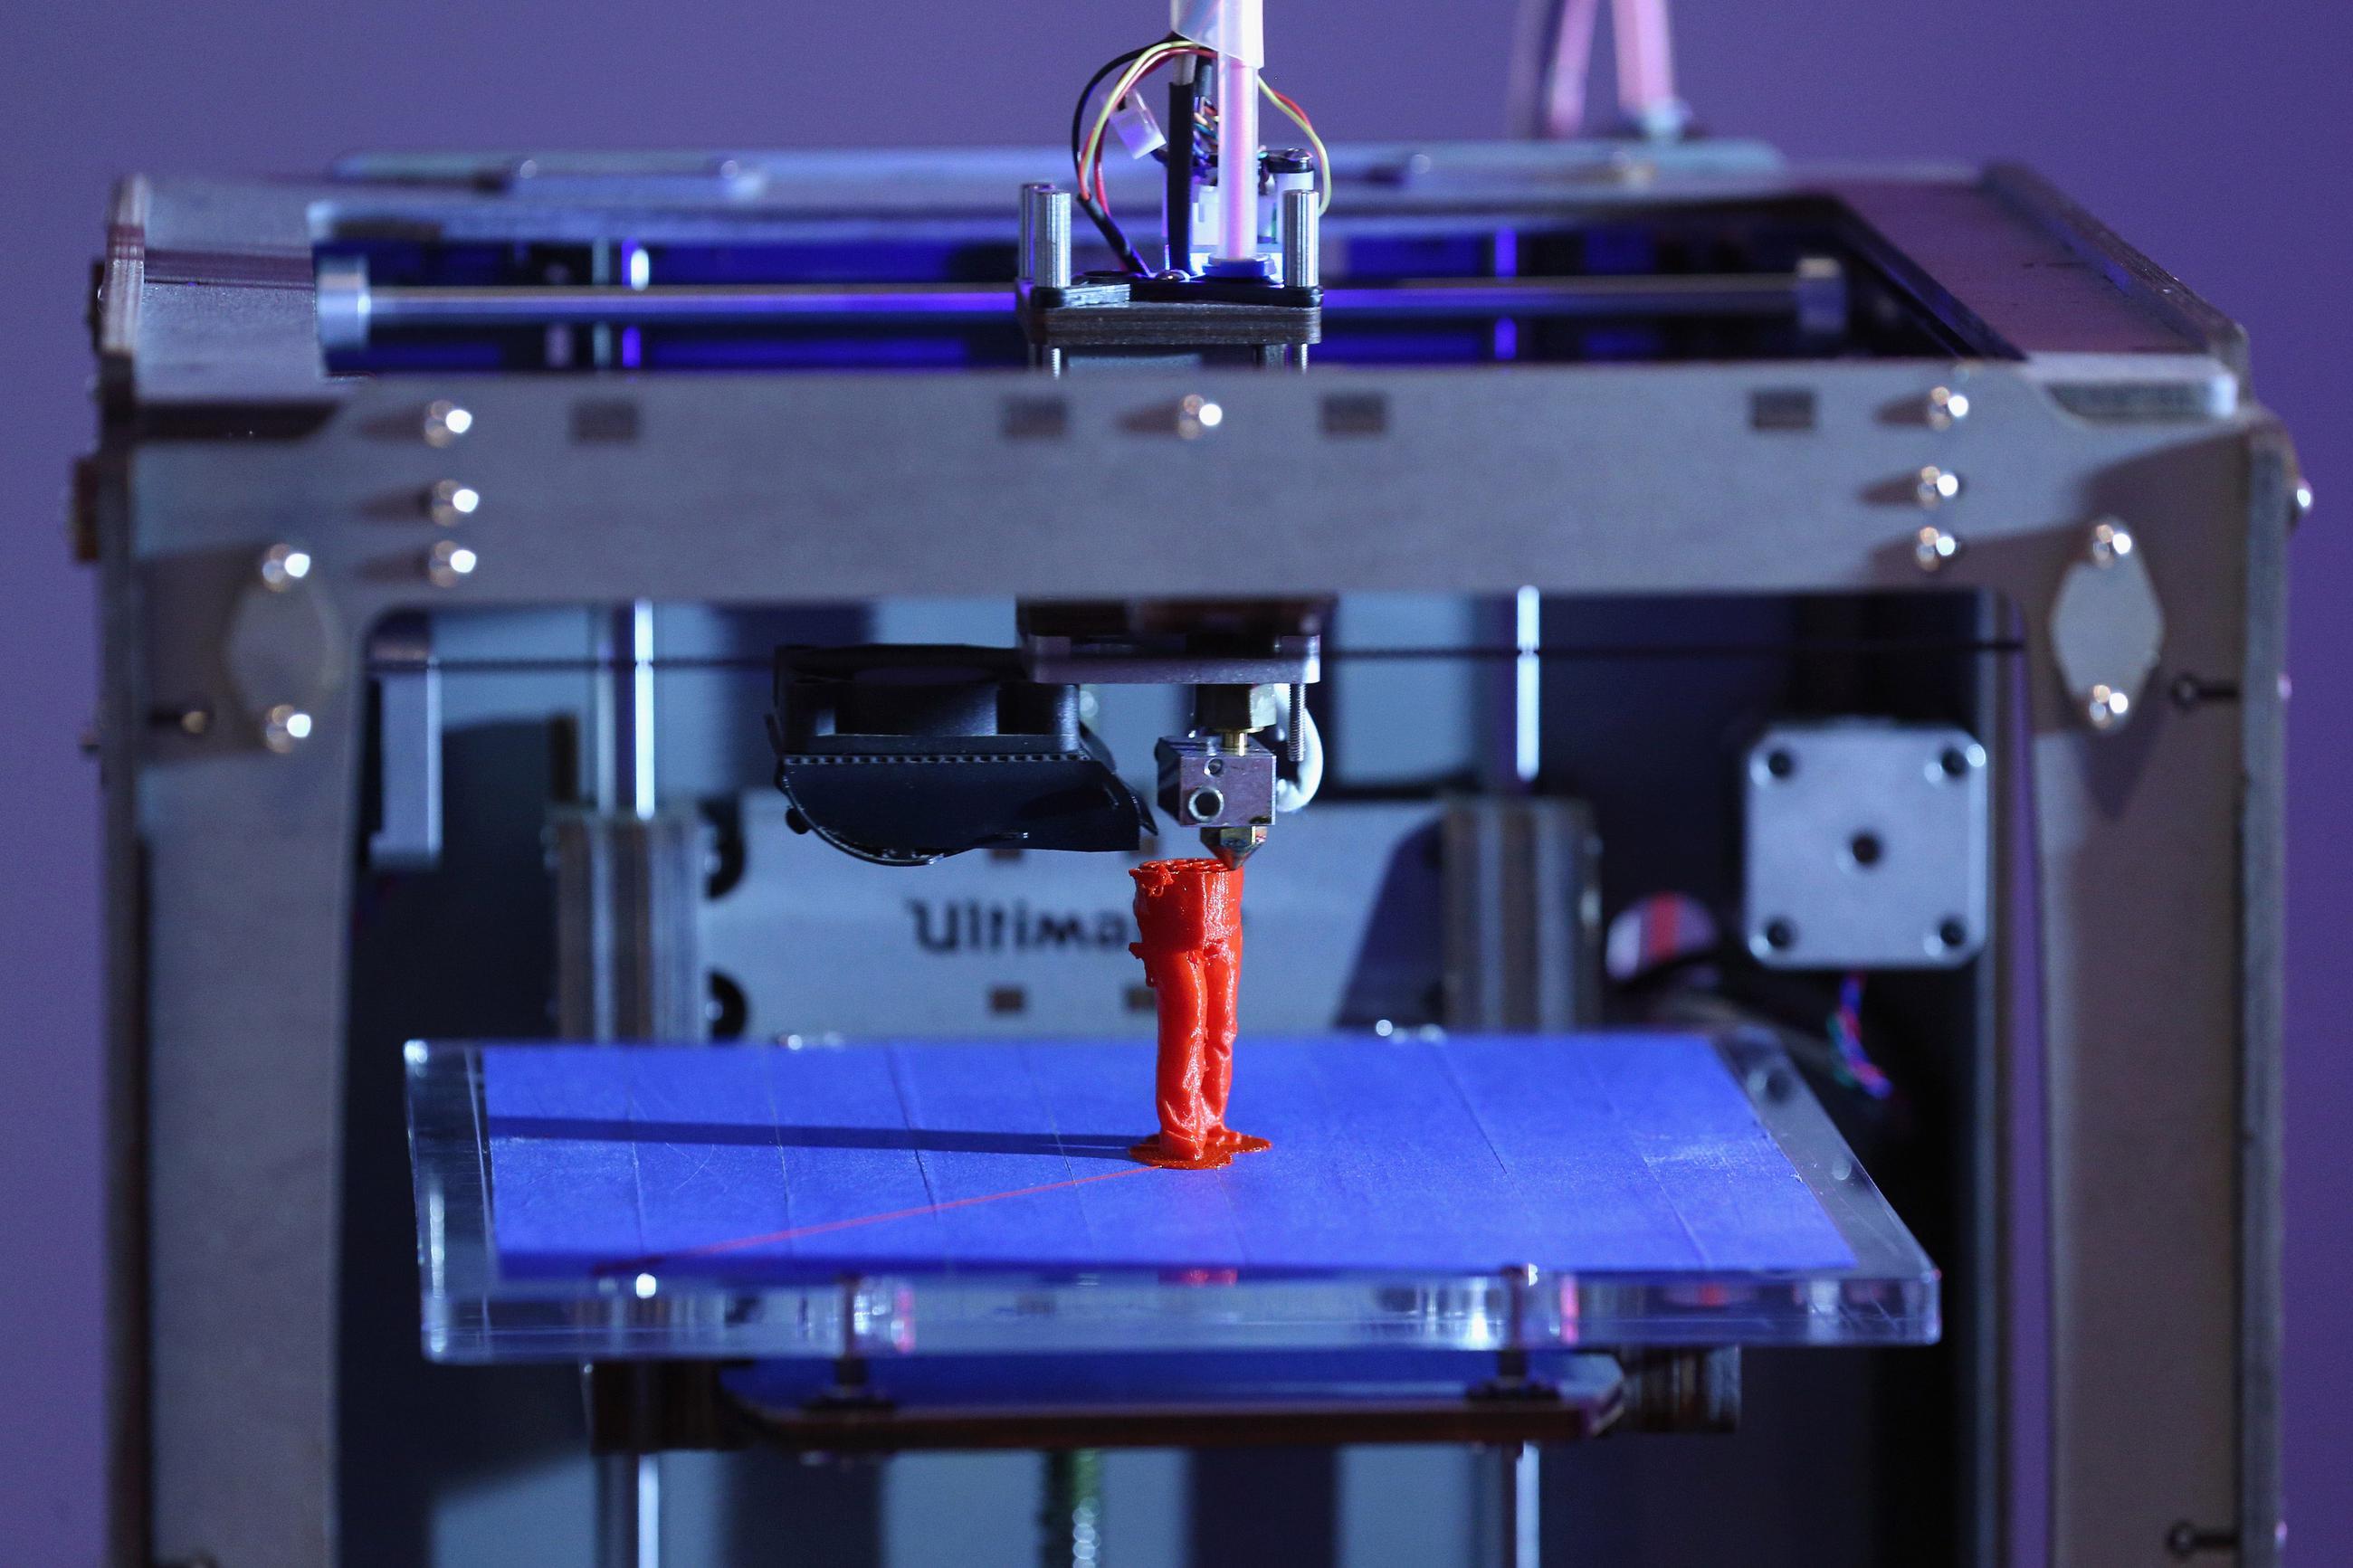 The Next Frontier for 3-D Printing: Human Organs - 183634686.jpg.optimizeD